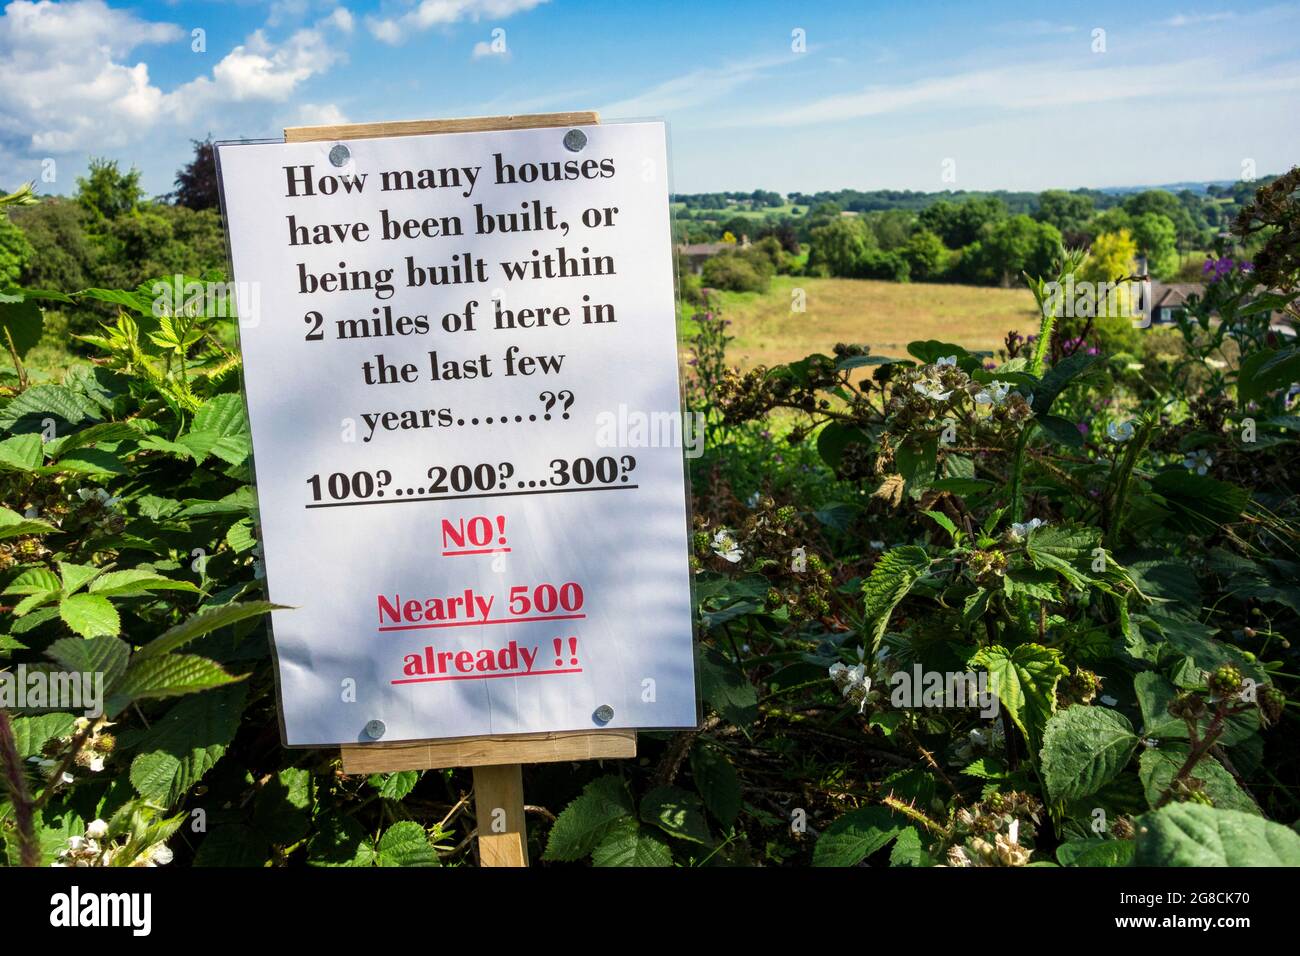 A protest sign next to land subject to a planning application in rural England, U.K. Stock Photo